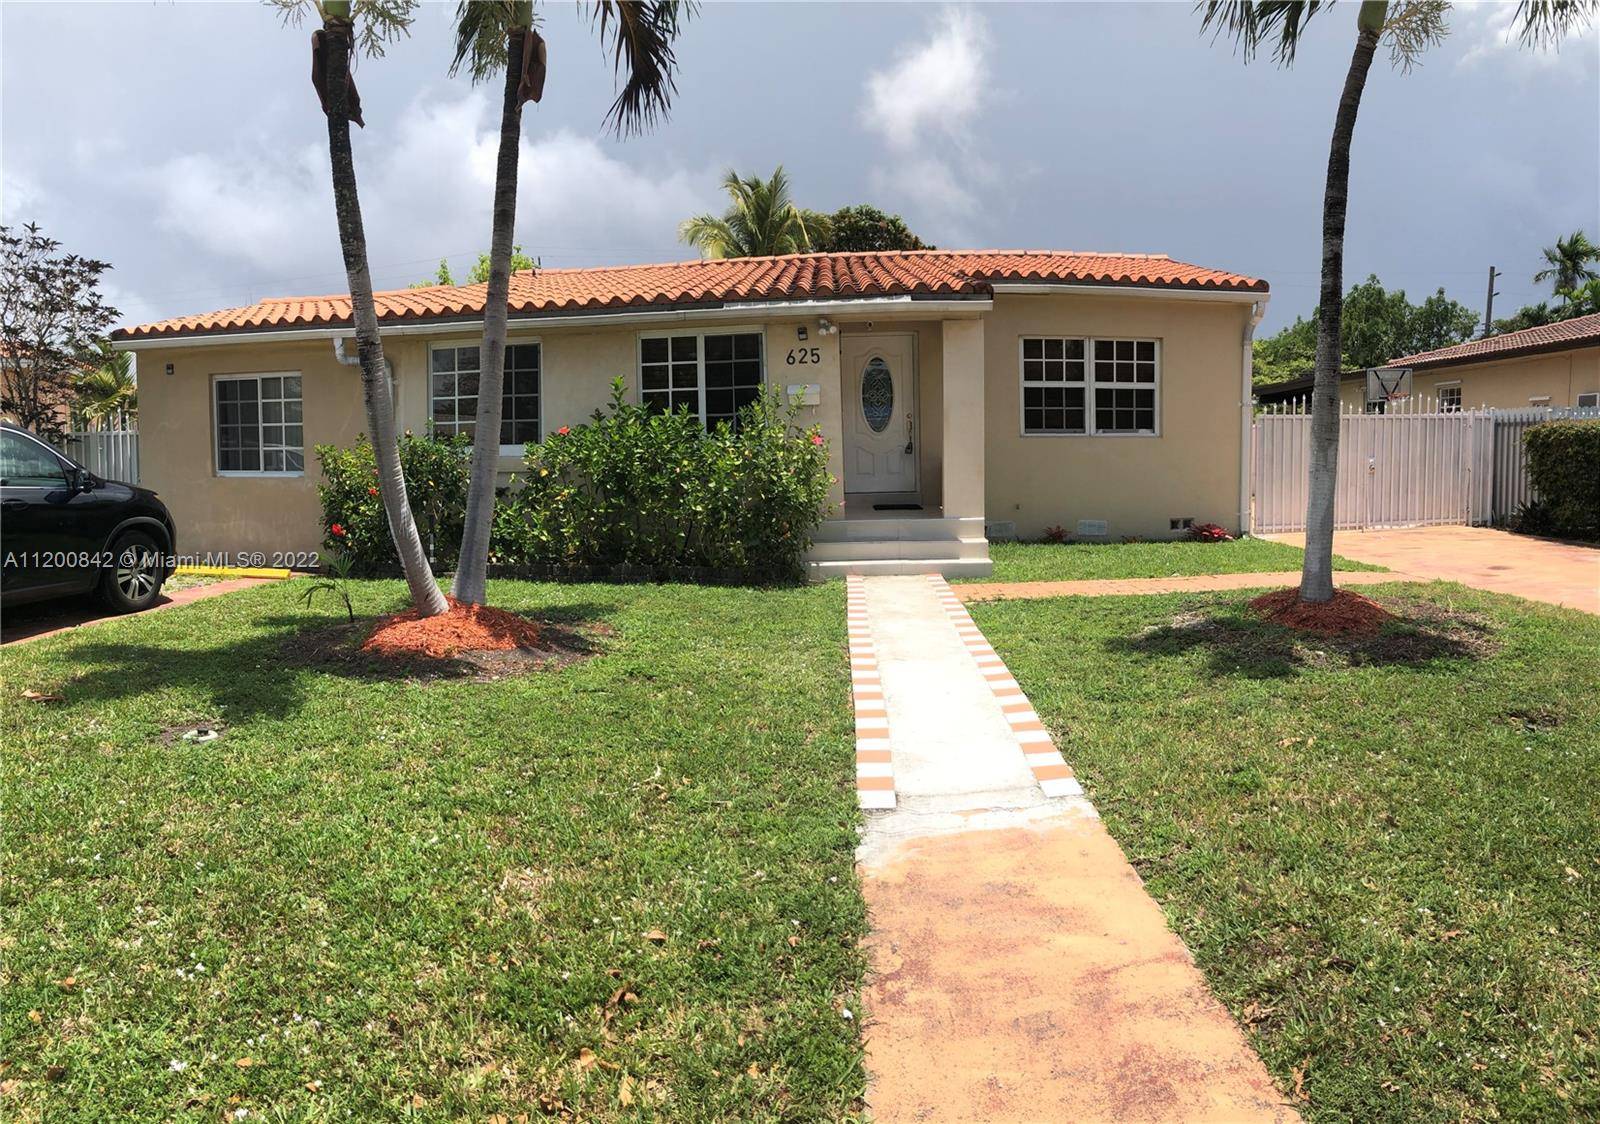 BEAUTIFUL HOUSE FOR RENT IN MIAMI SPRINGS, EXCELLENT LOCATION, FURNITURE, CAN BE RENTED MONTHLY OR PER YEAR, FULLY FURNISHED 3 BEDROOMS PLUS ONE OFFICE, 2 BATHROOMS.